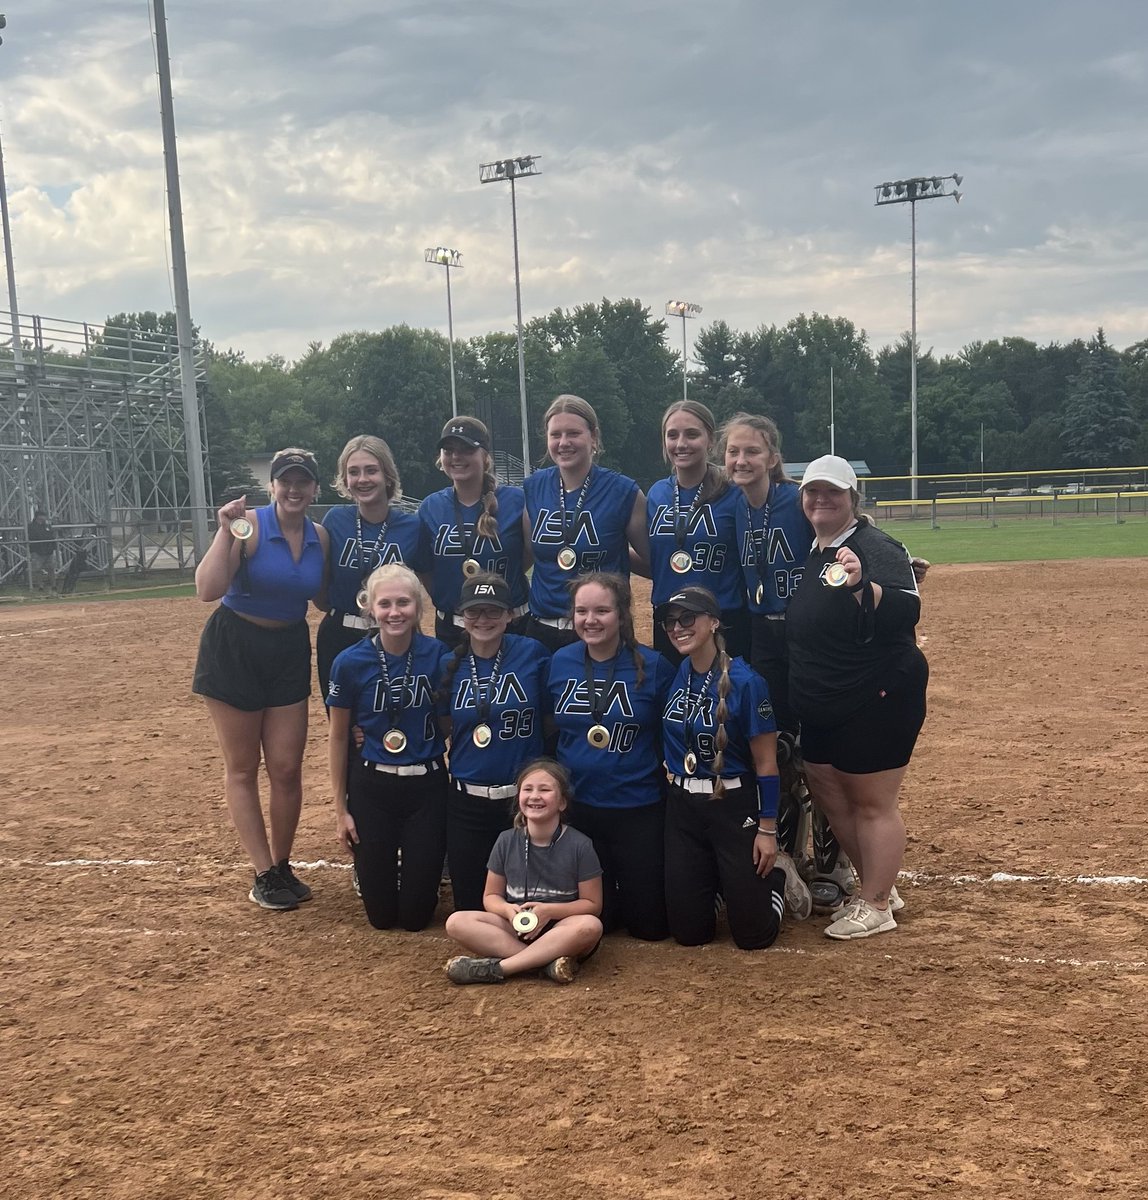 Congratulations to 16U White who took FIRST PLACE in the Platinum bracket of the Eau Claire Fastpitch Classic!🥇🥎 #ISAproud #makeanimpact #softball #champs